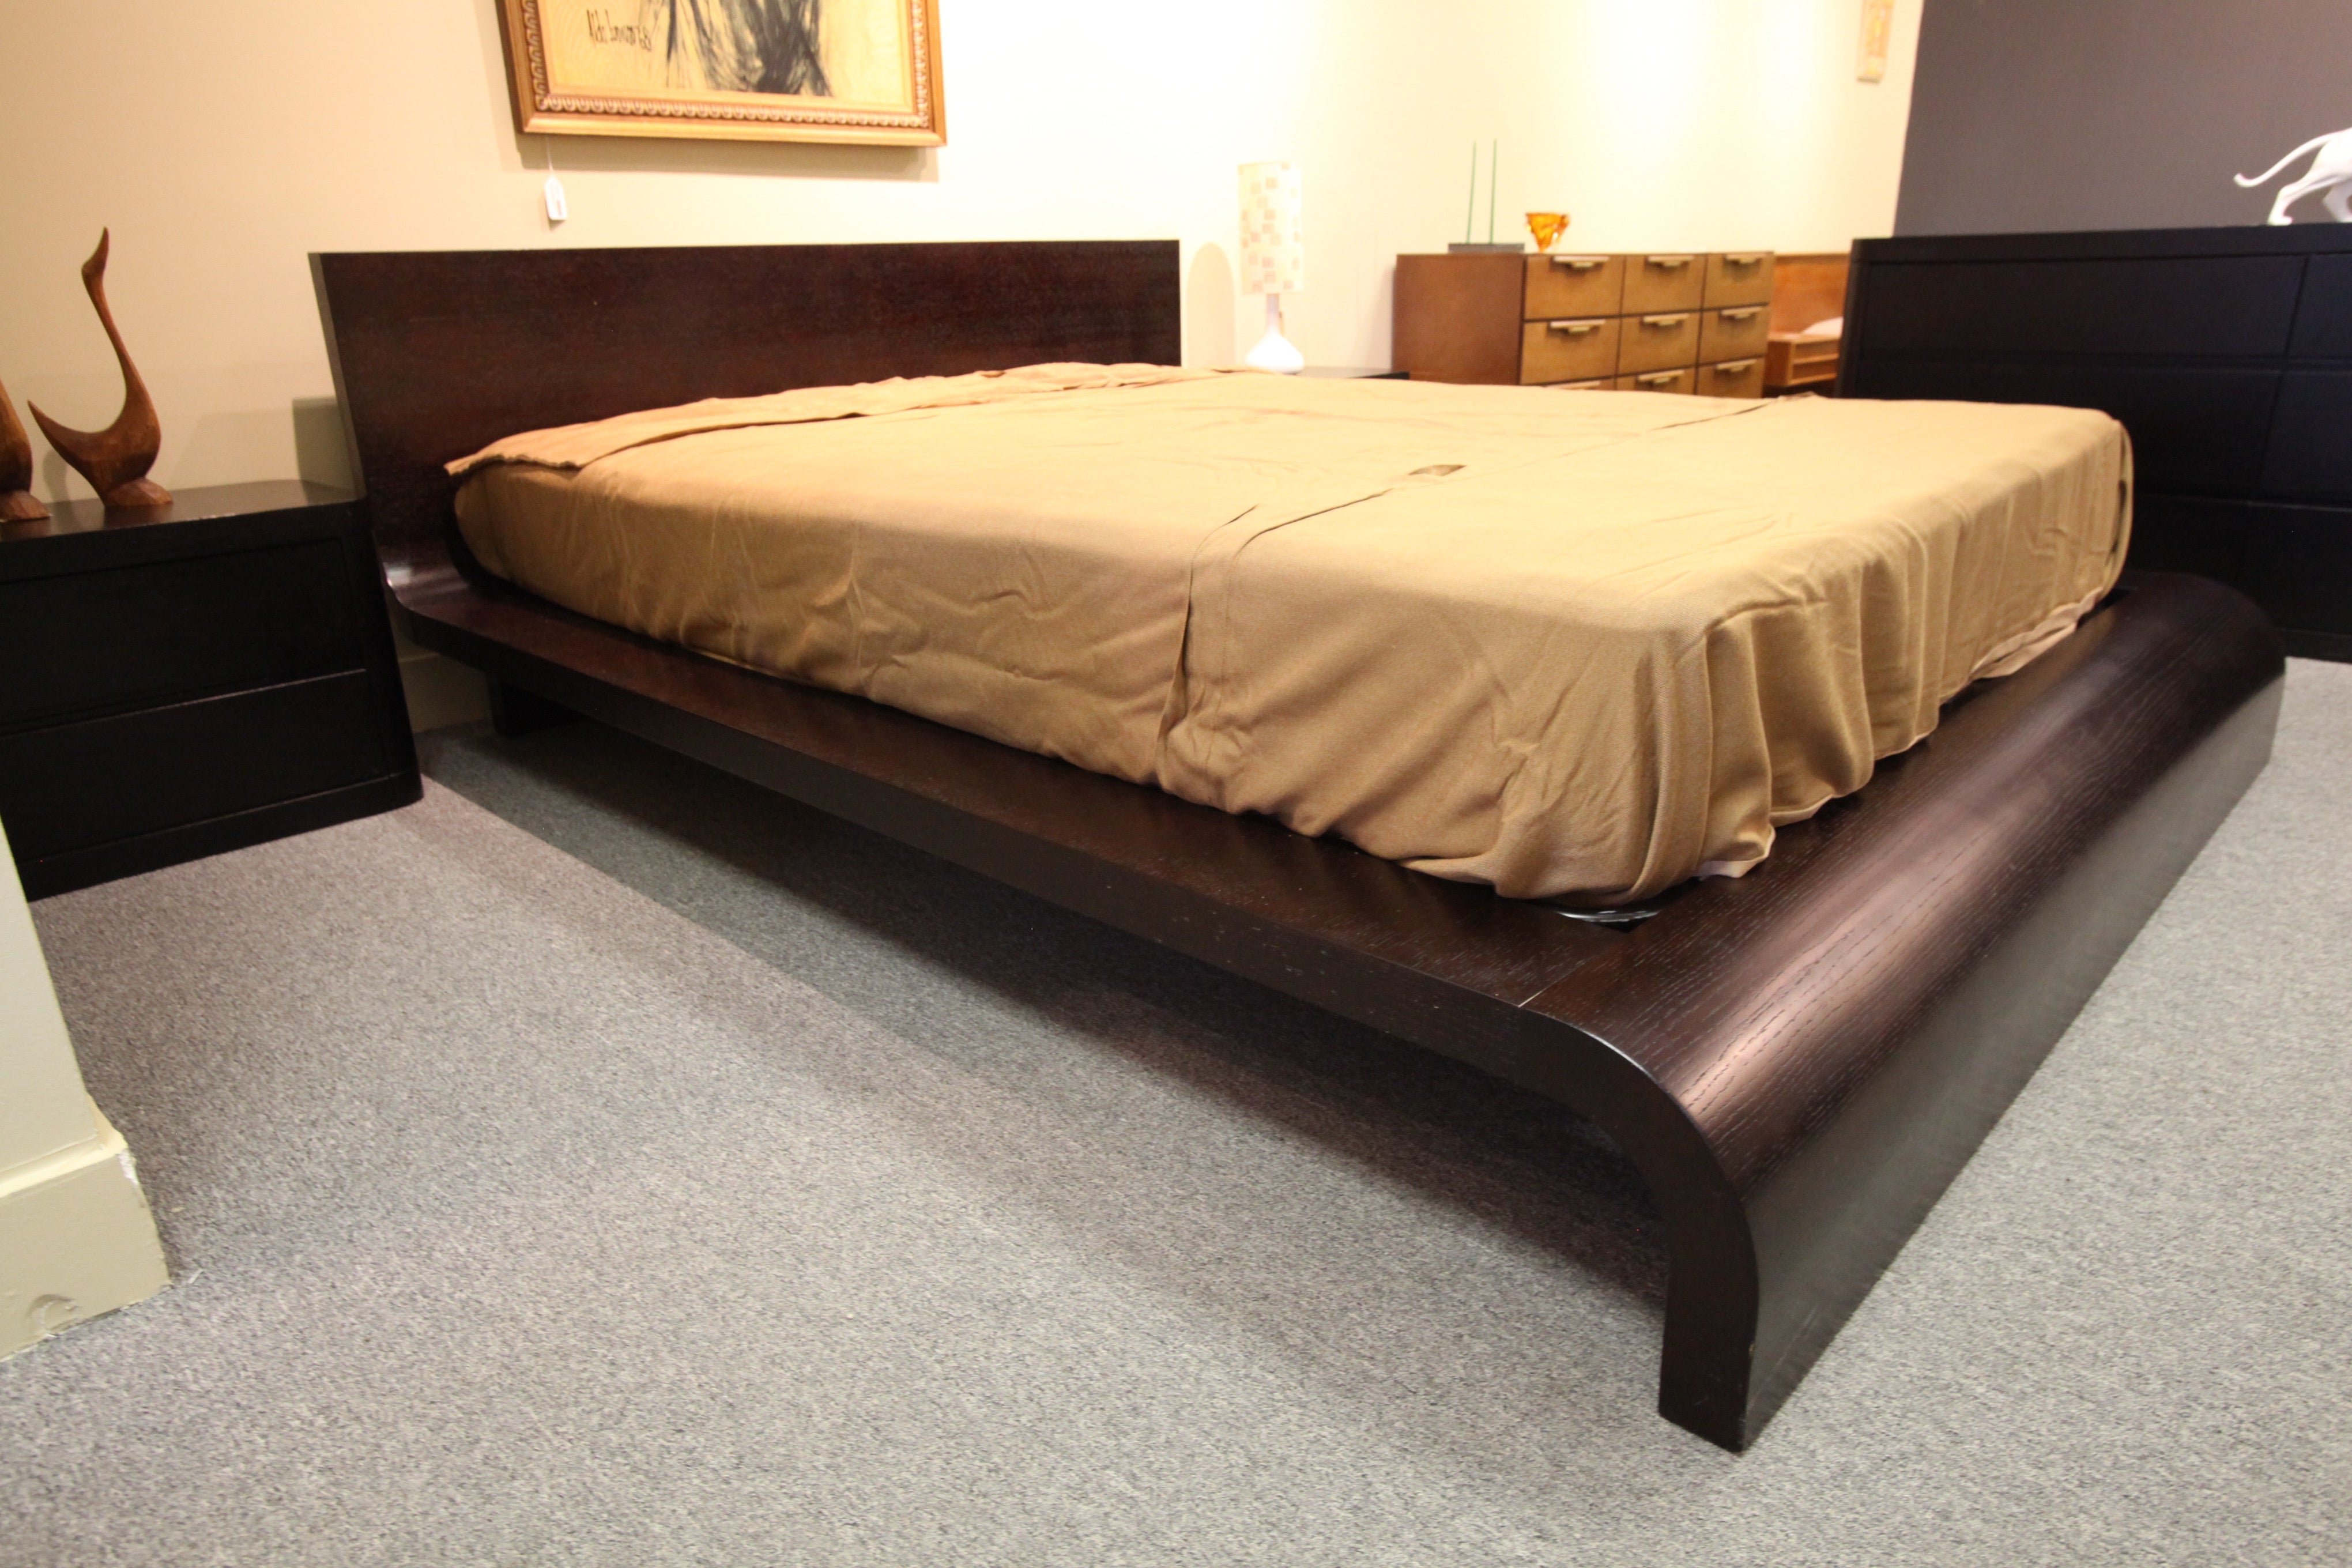 Queen size Flo Bed  (72.75"W x 90"L)